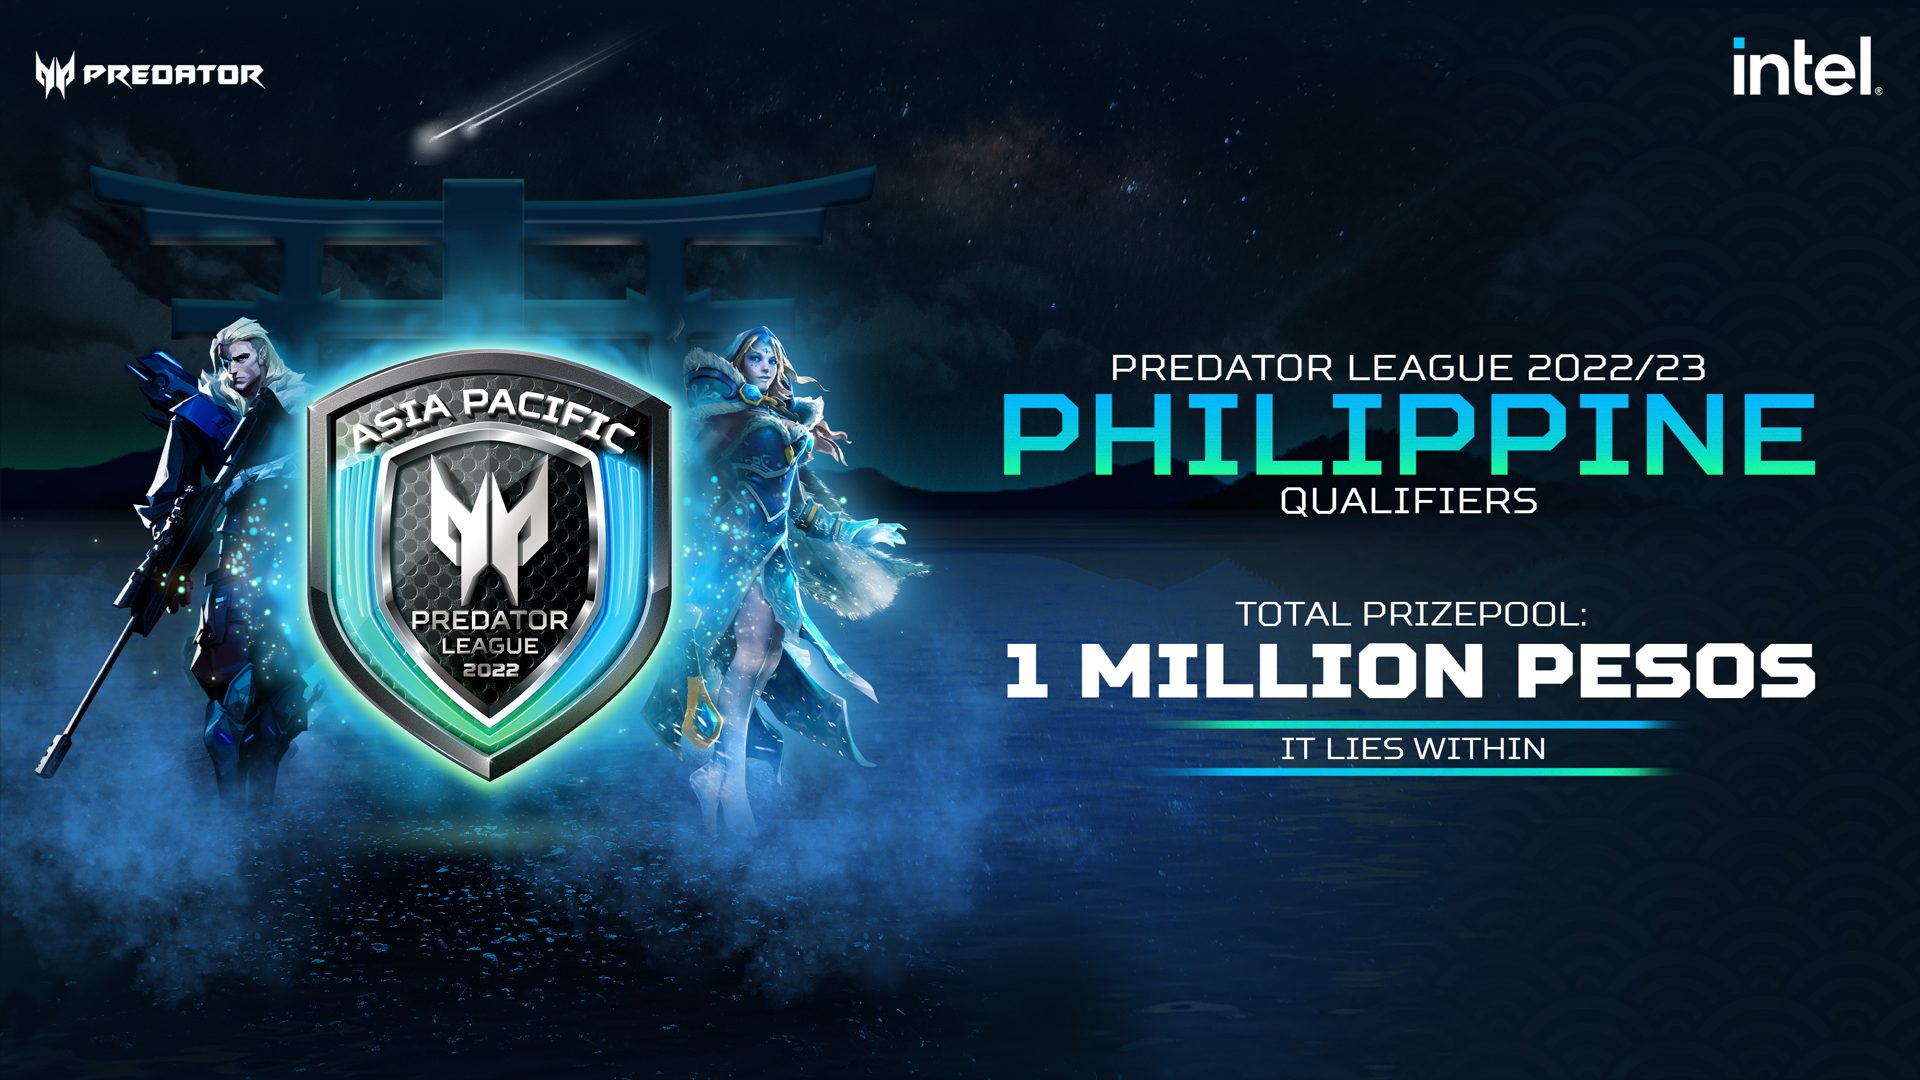 Predator League Philippine Finals 2022 to take place on September 17-18